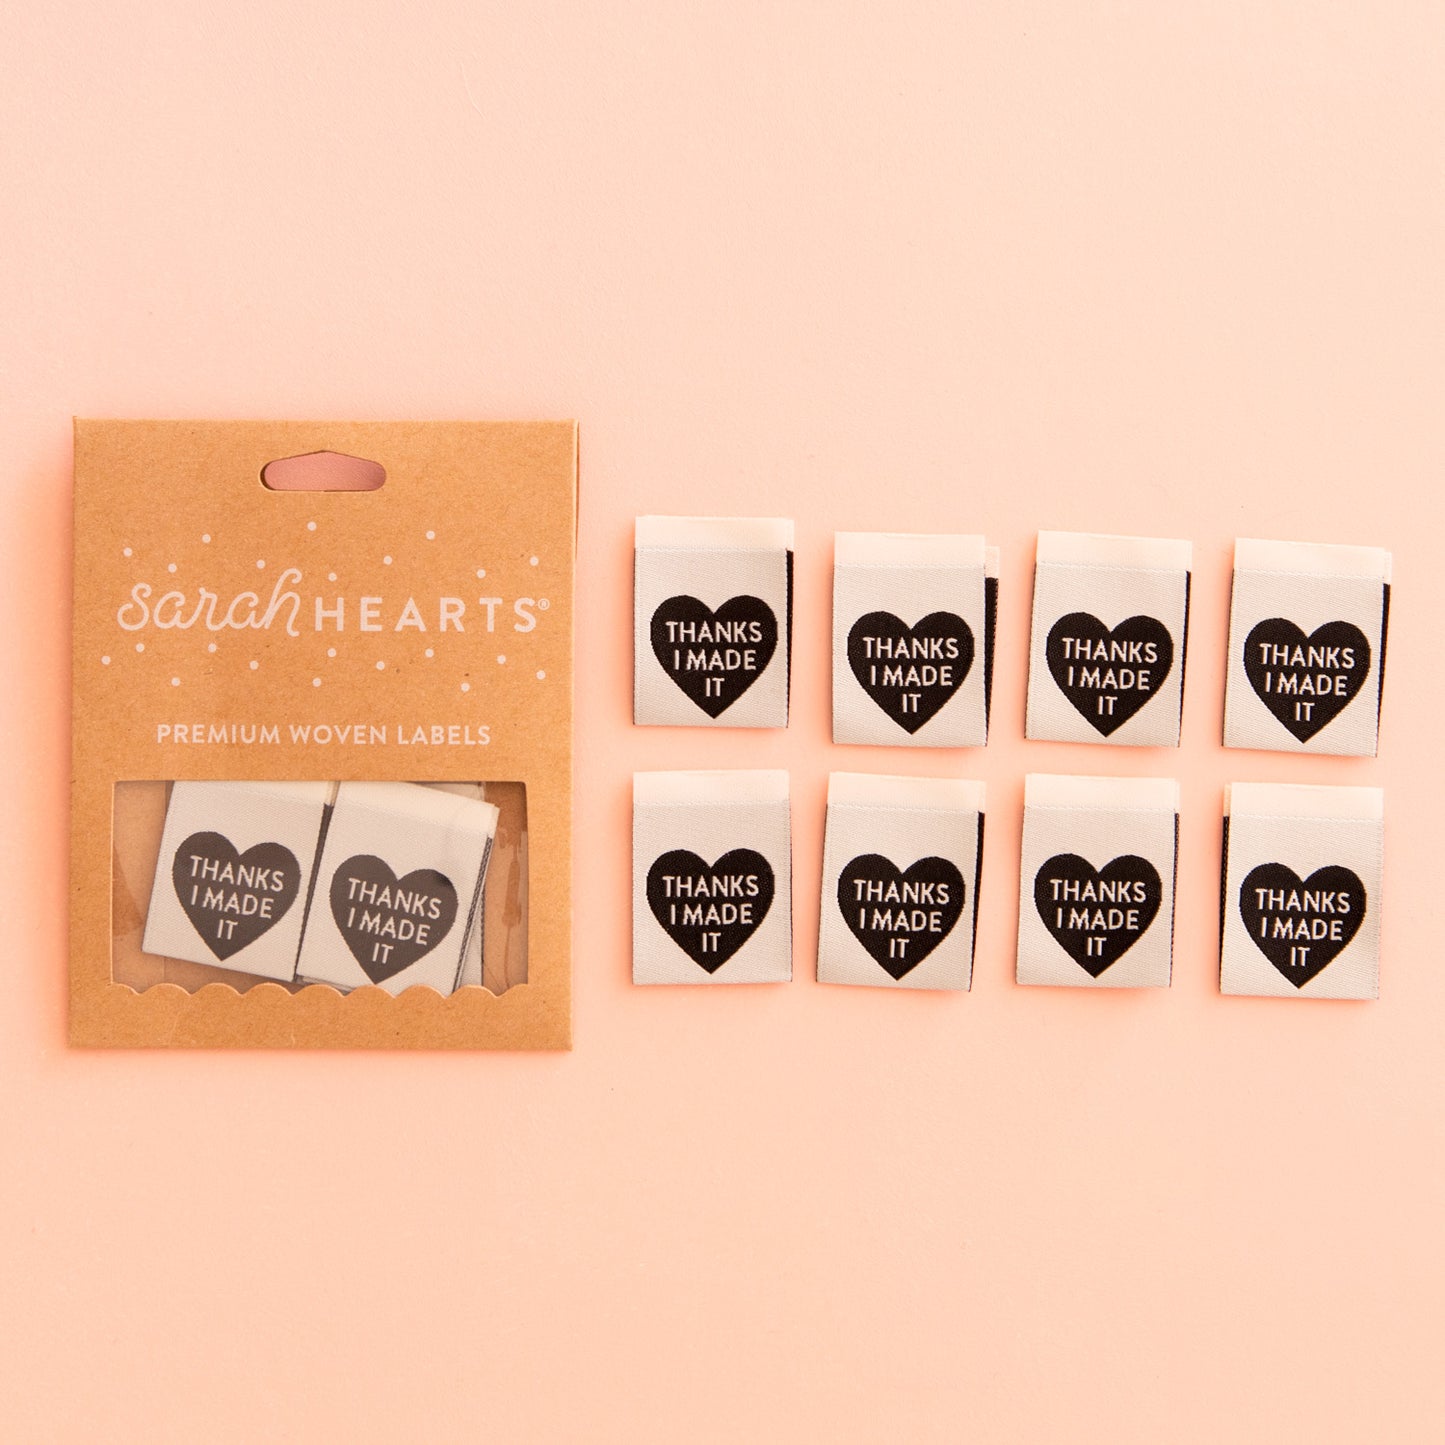 Sarah Hearts Woven Labels - Thanks I Made It (Heart)